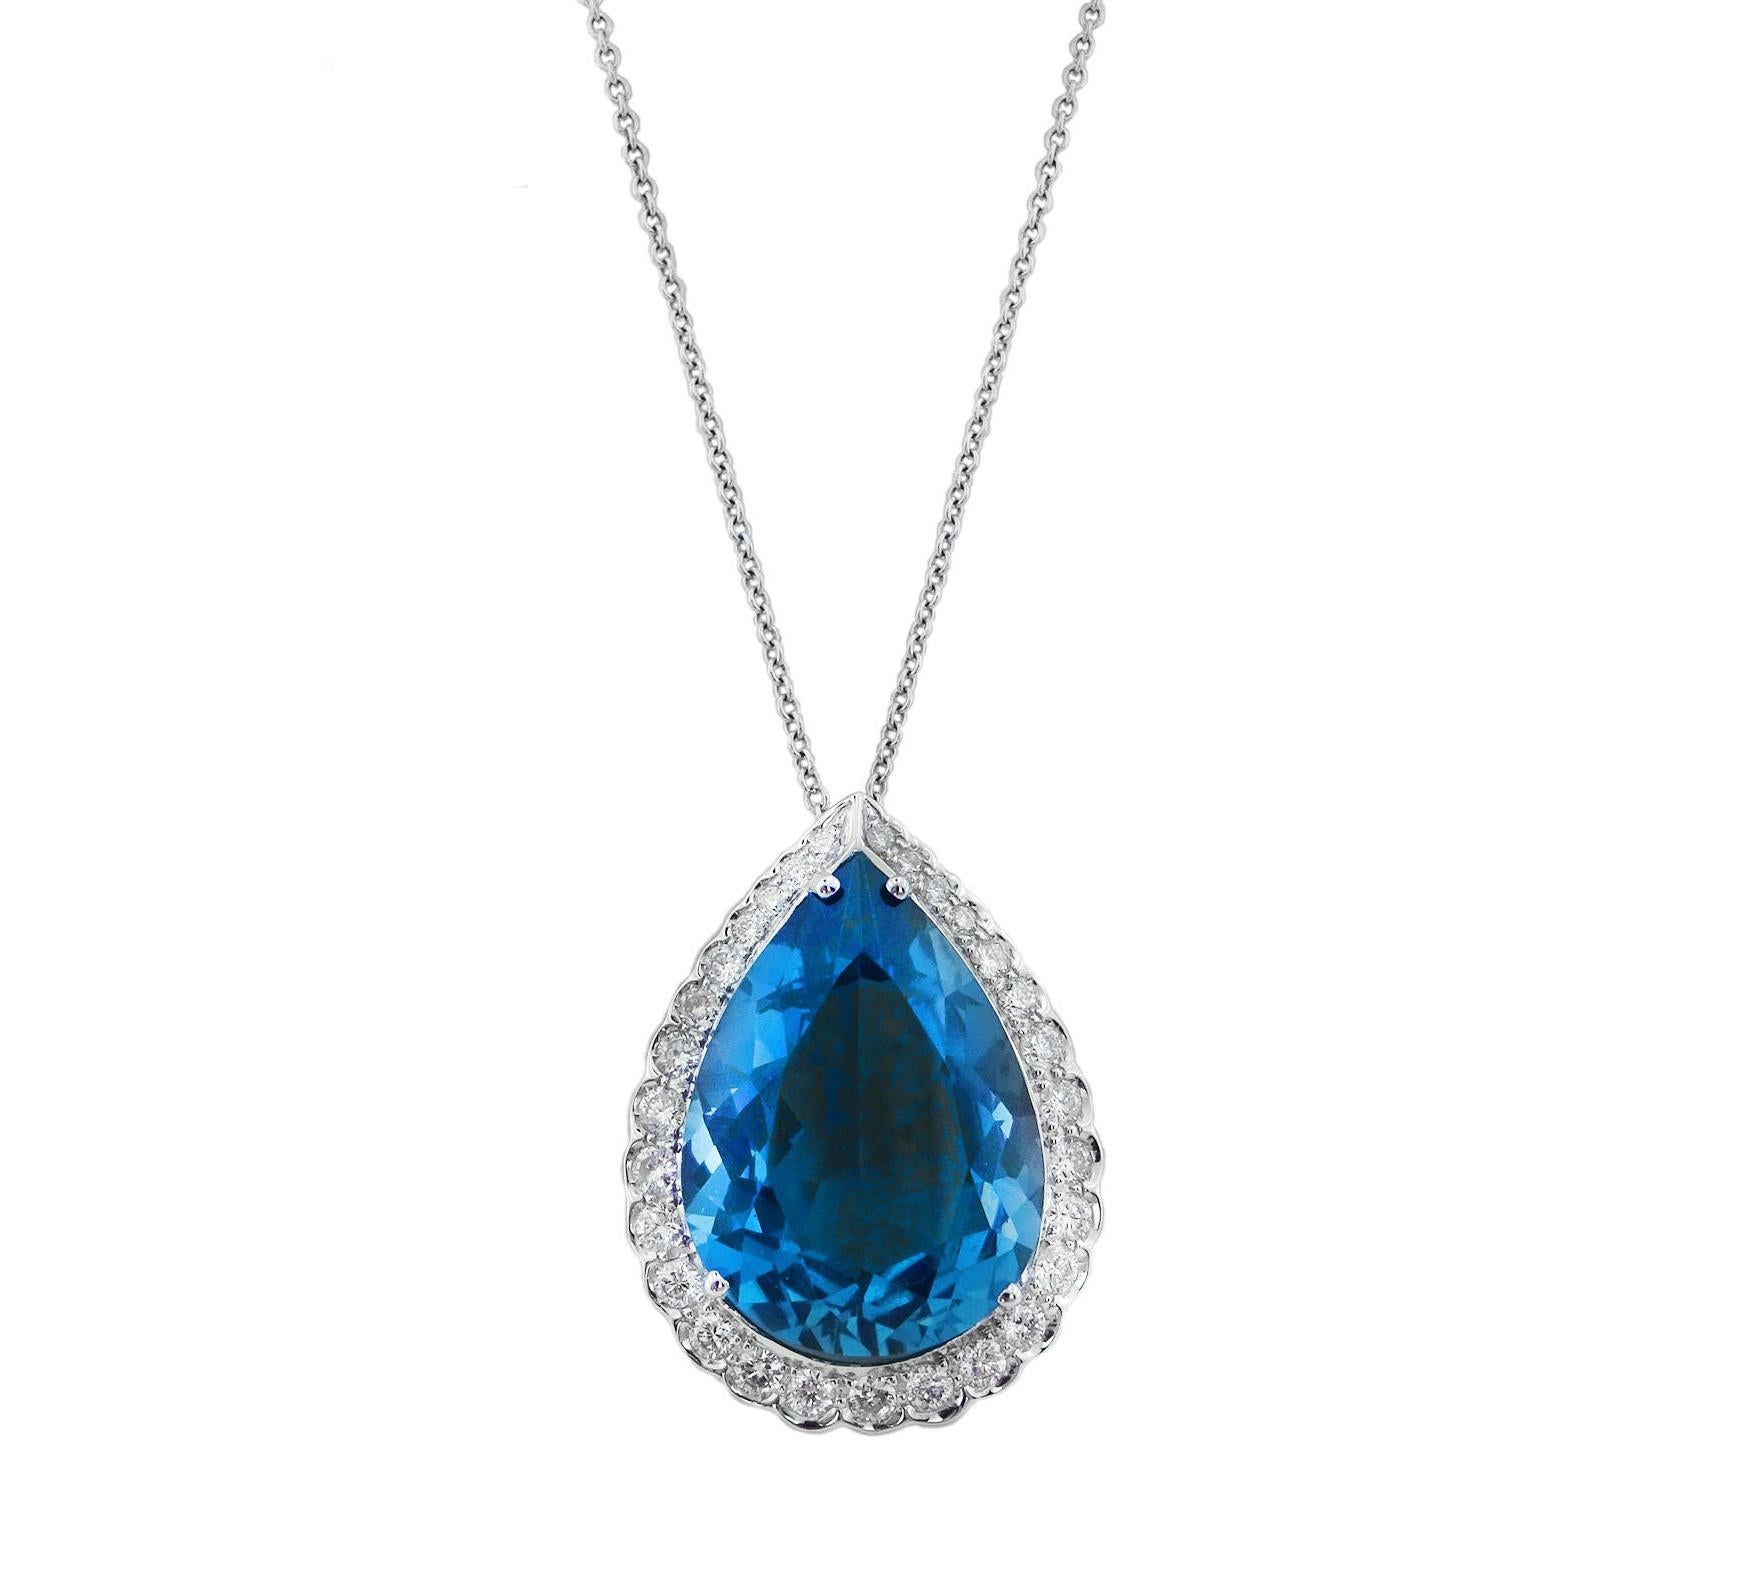 Modern White Gold Pear Cut Blue Topaz Necklace with Diamonds, 11.64 Carat For Sale